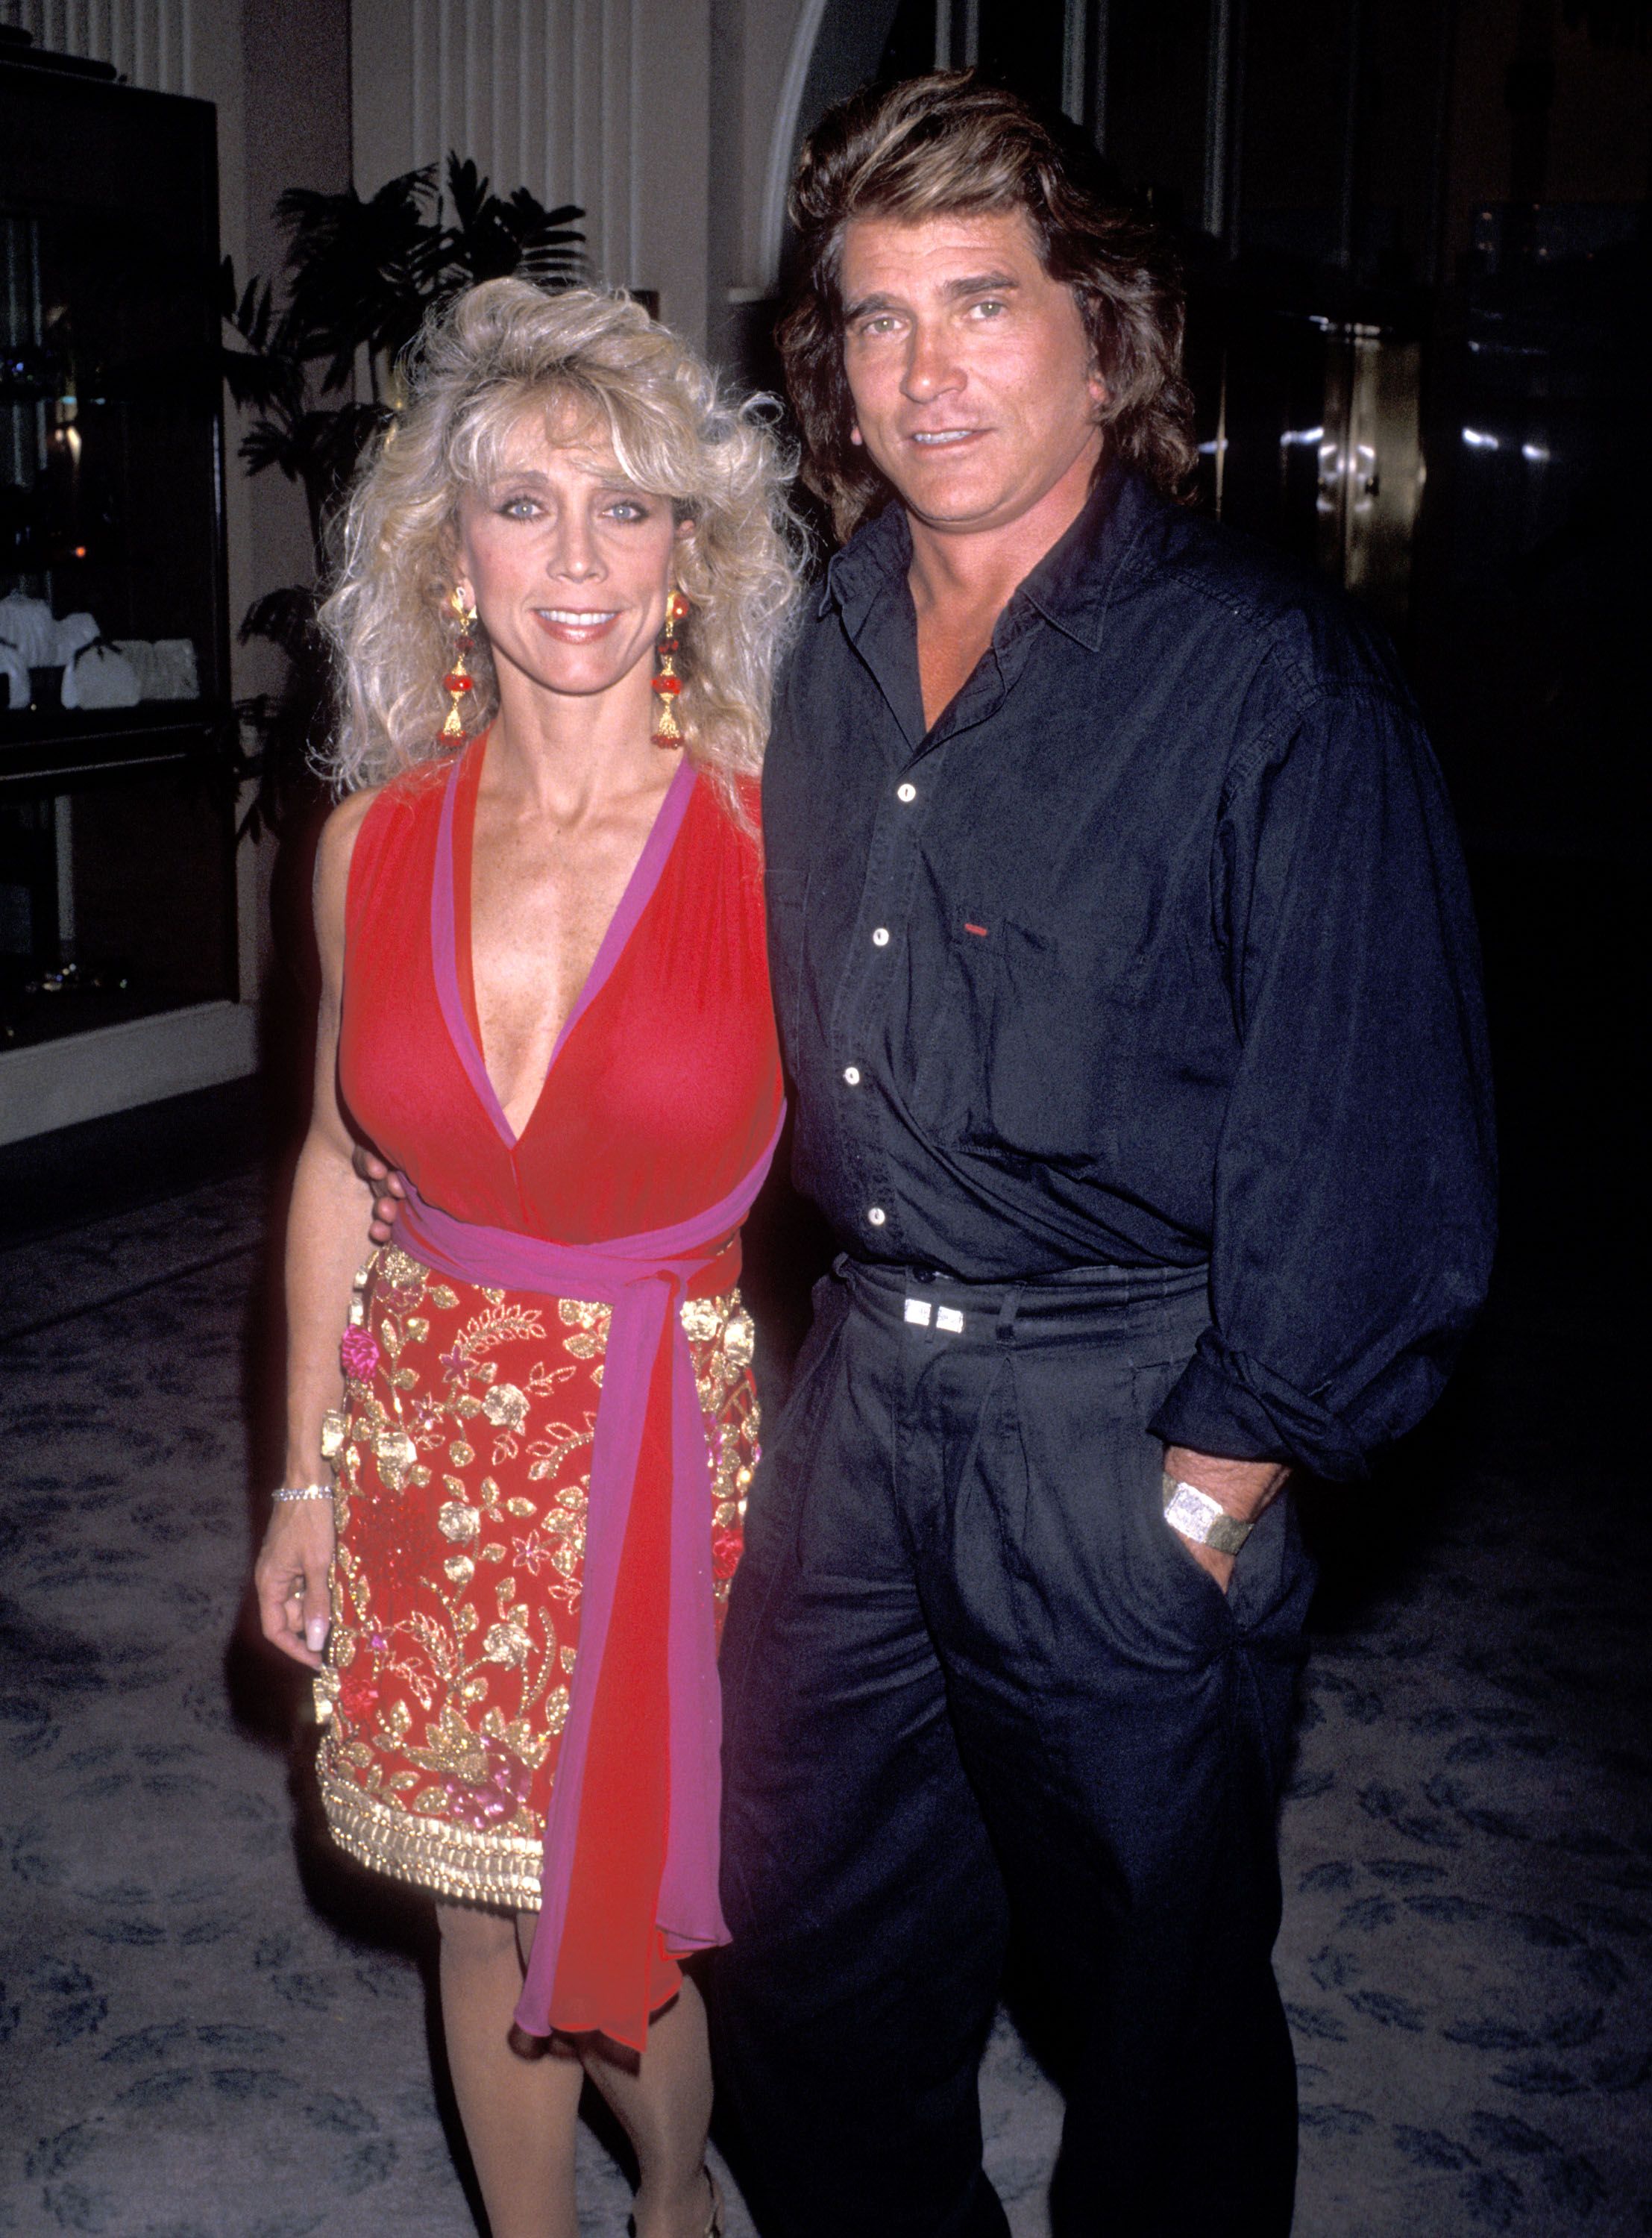 Michael Landon and wife Cindy Landon attend the National Down Syndrome Congress' Third Annual Michael Landon Celebrity Gala in 1989 | Source: Getty Images